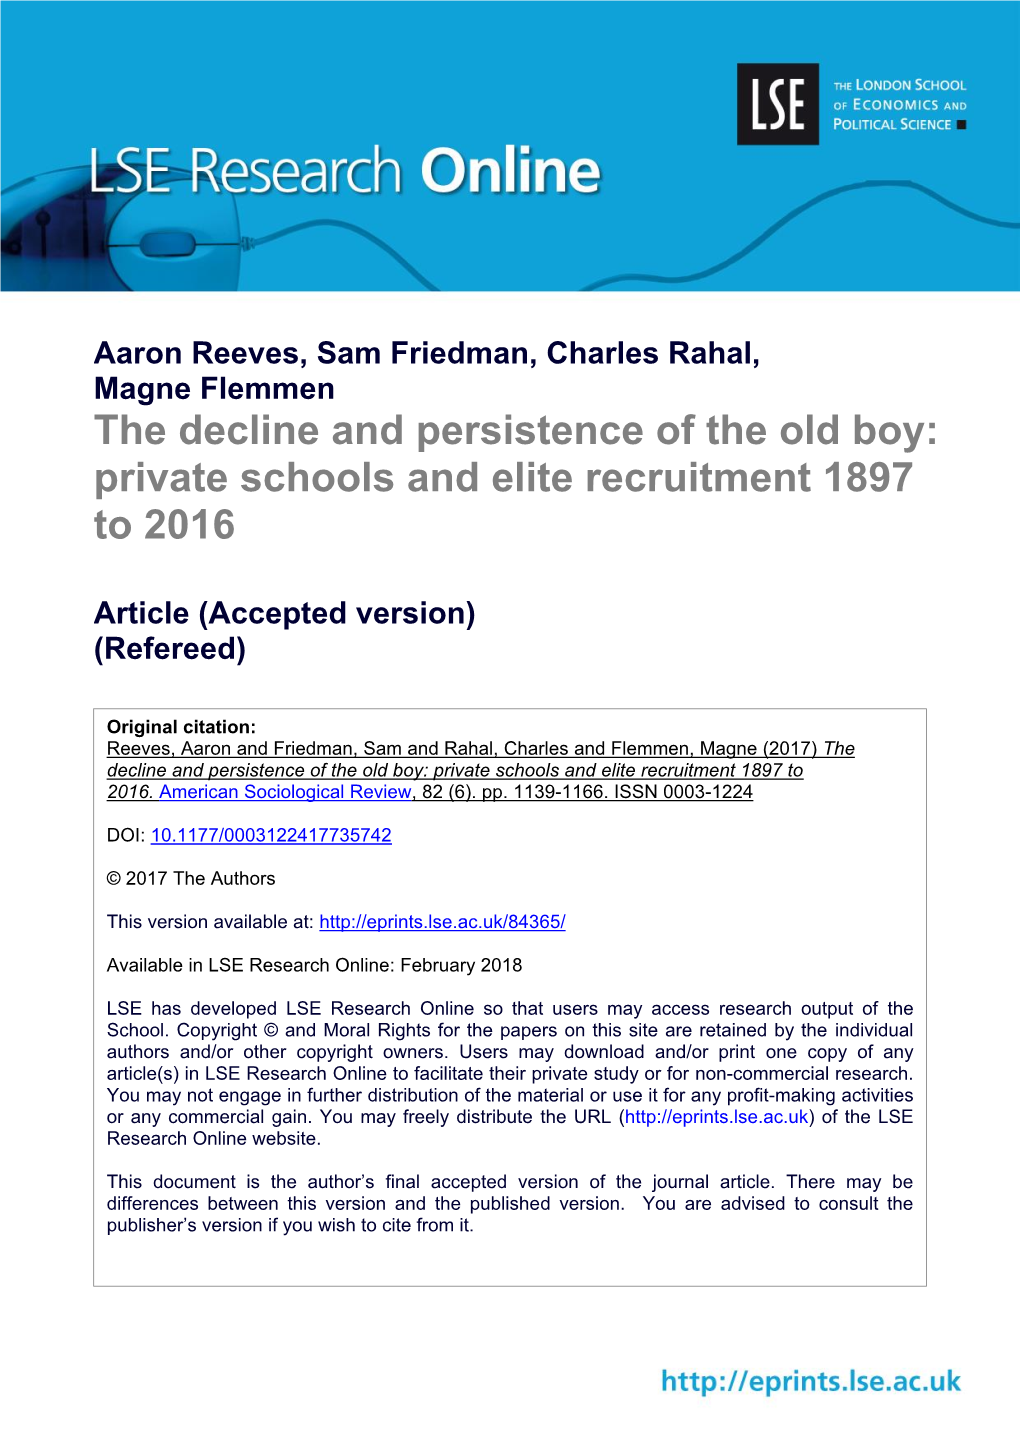 The Decline and Persistence of the Old Boy: Private Schools and Elite Recruitment 1897 to 2016